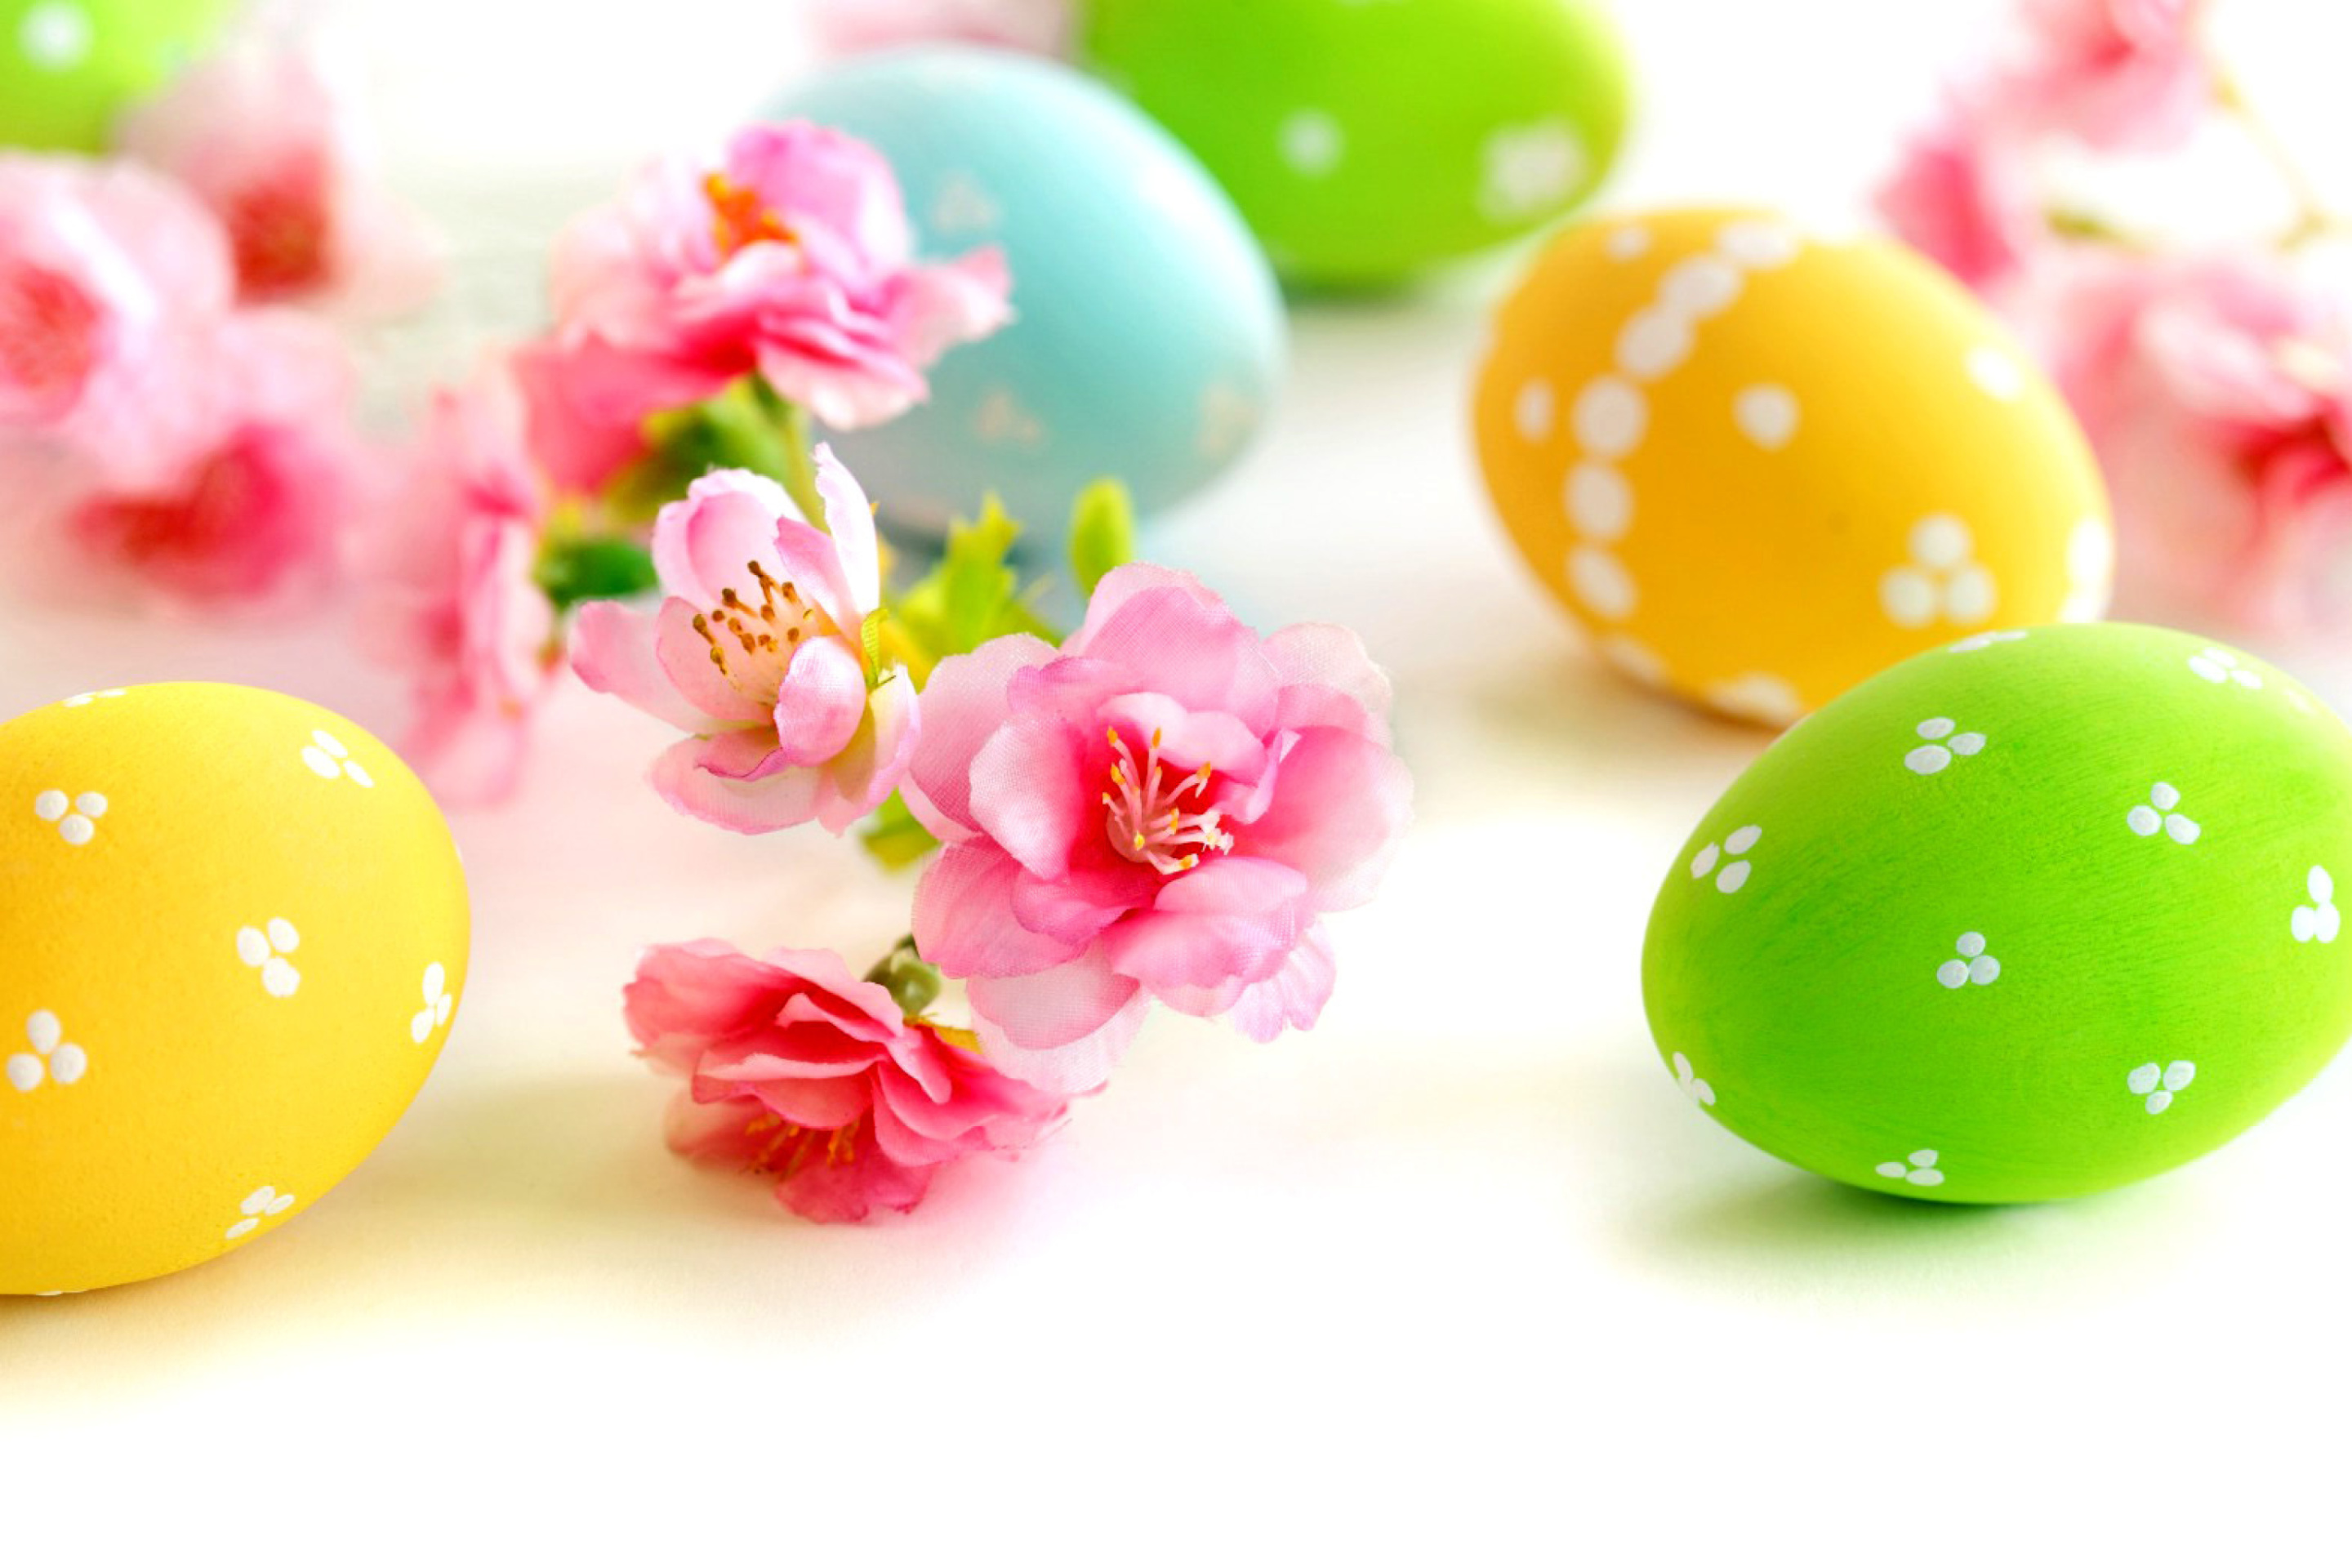 Easter Eggs and Spring Flowers wallpaper 2880x1920